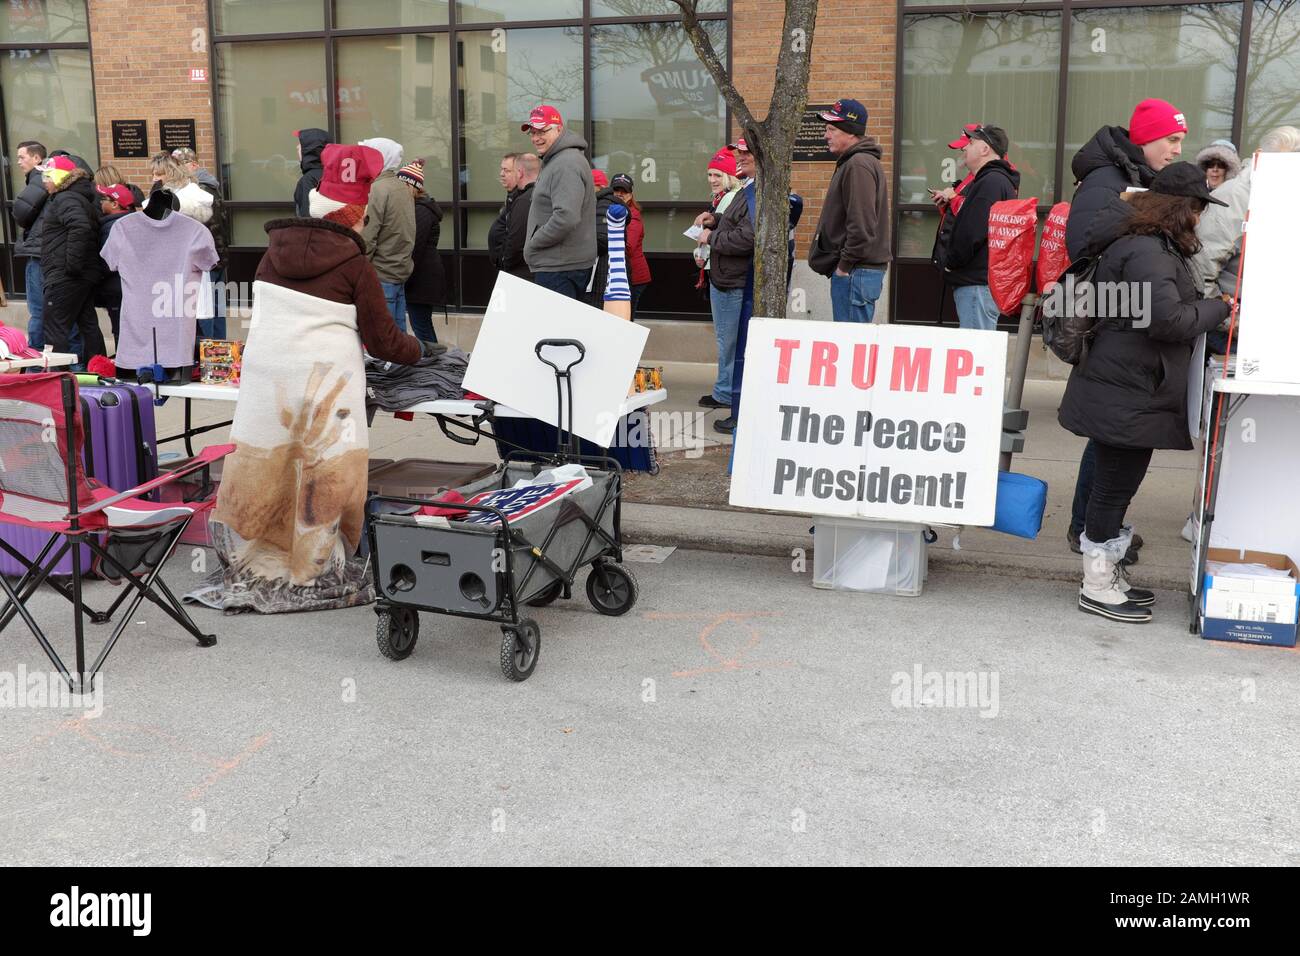 'Trump The Peace President' is part of the street scene of Trump supporters in line to attend the Trump 2020 Reelection Rally in Toledo, Ohio, USA. Stock Photo